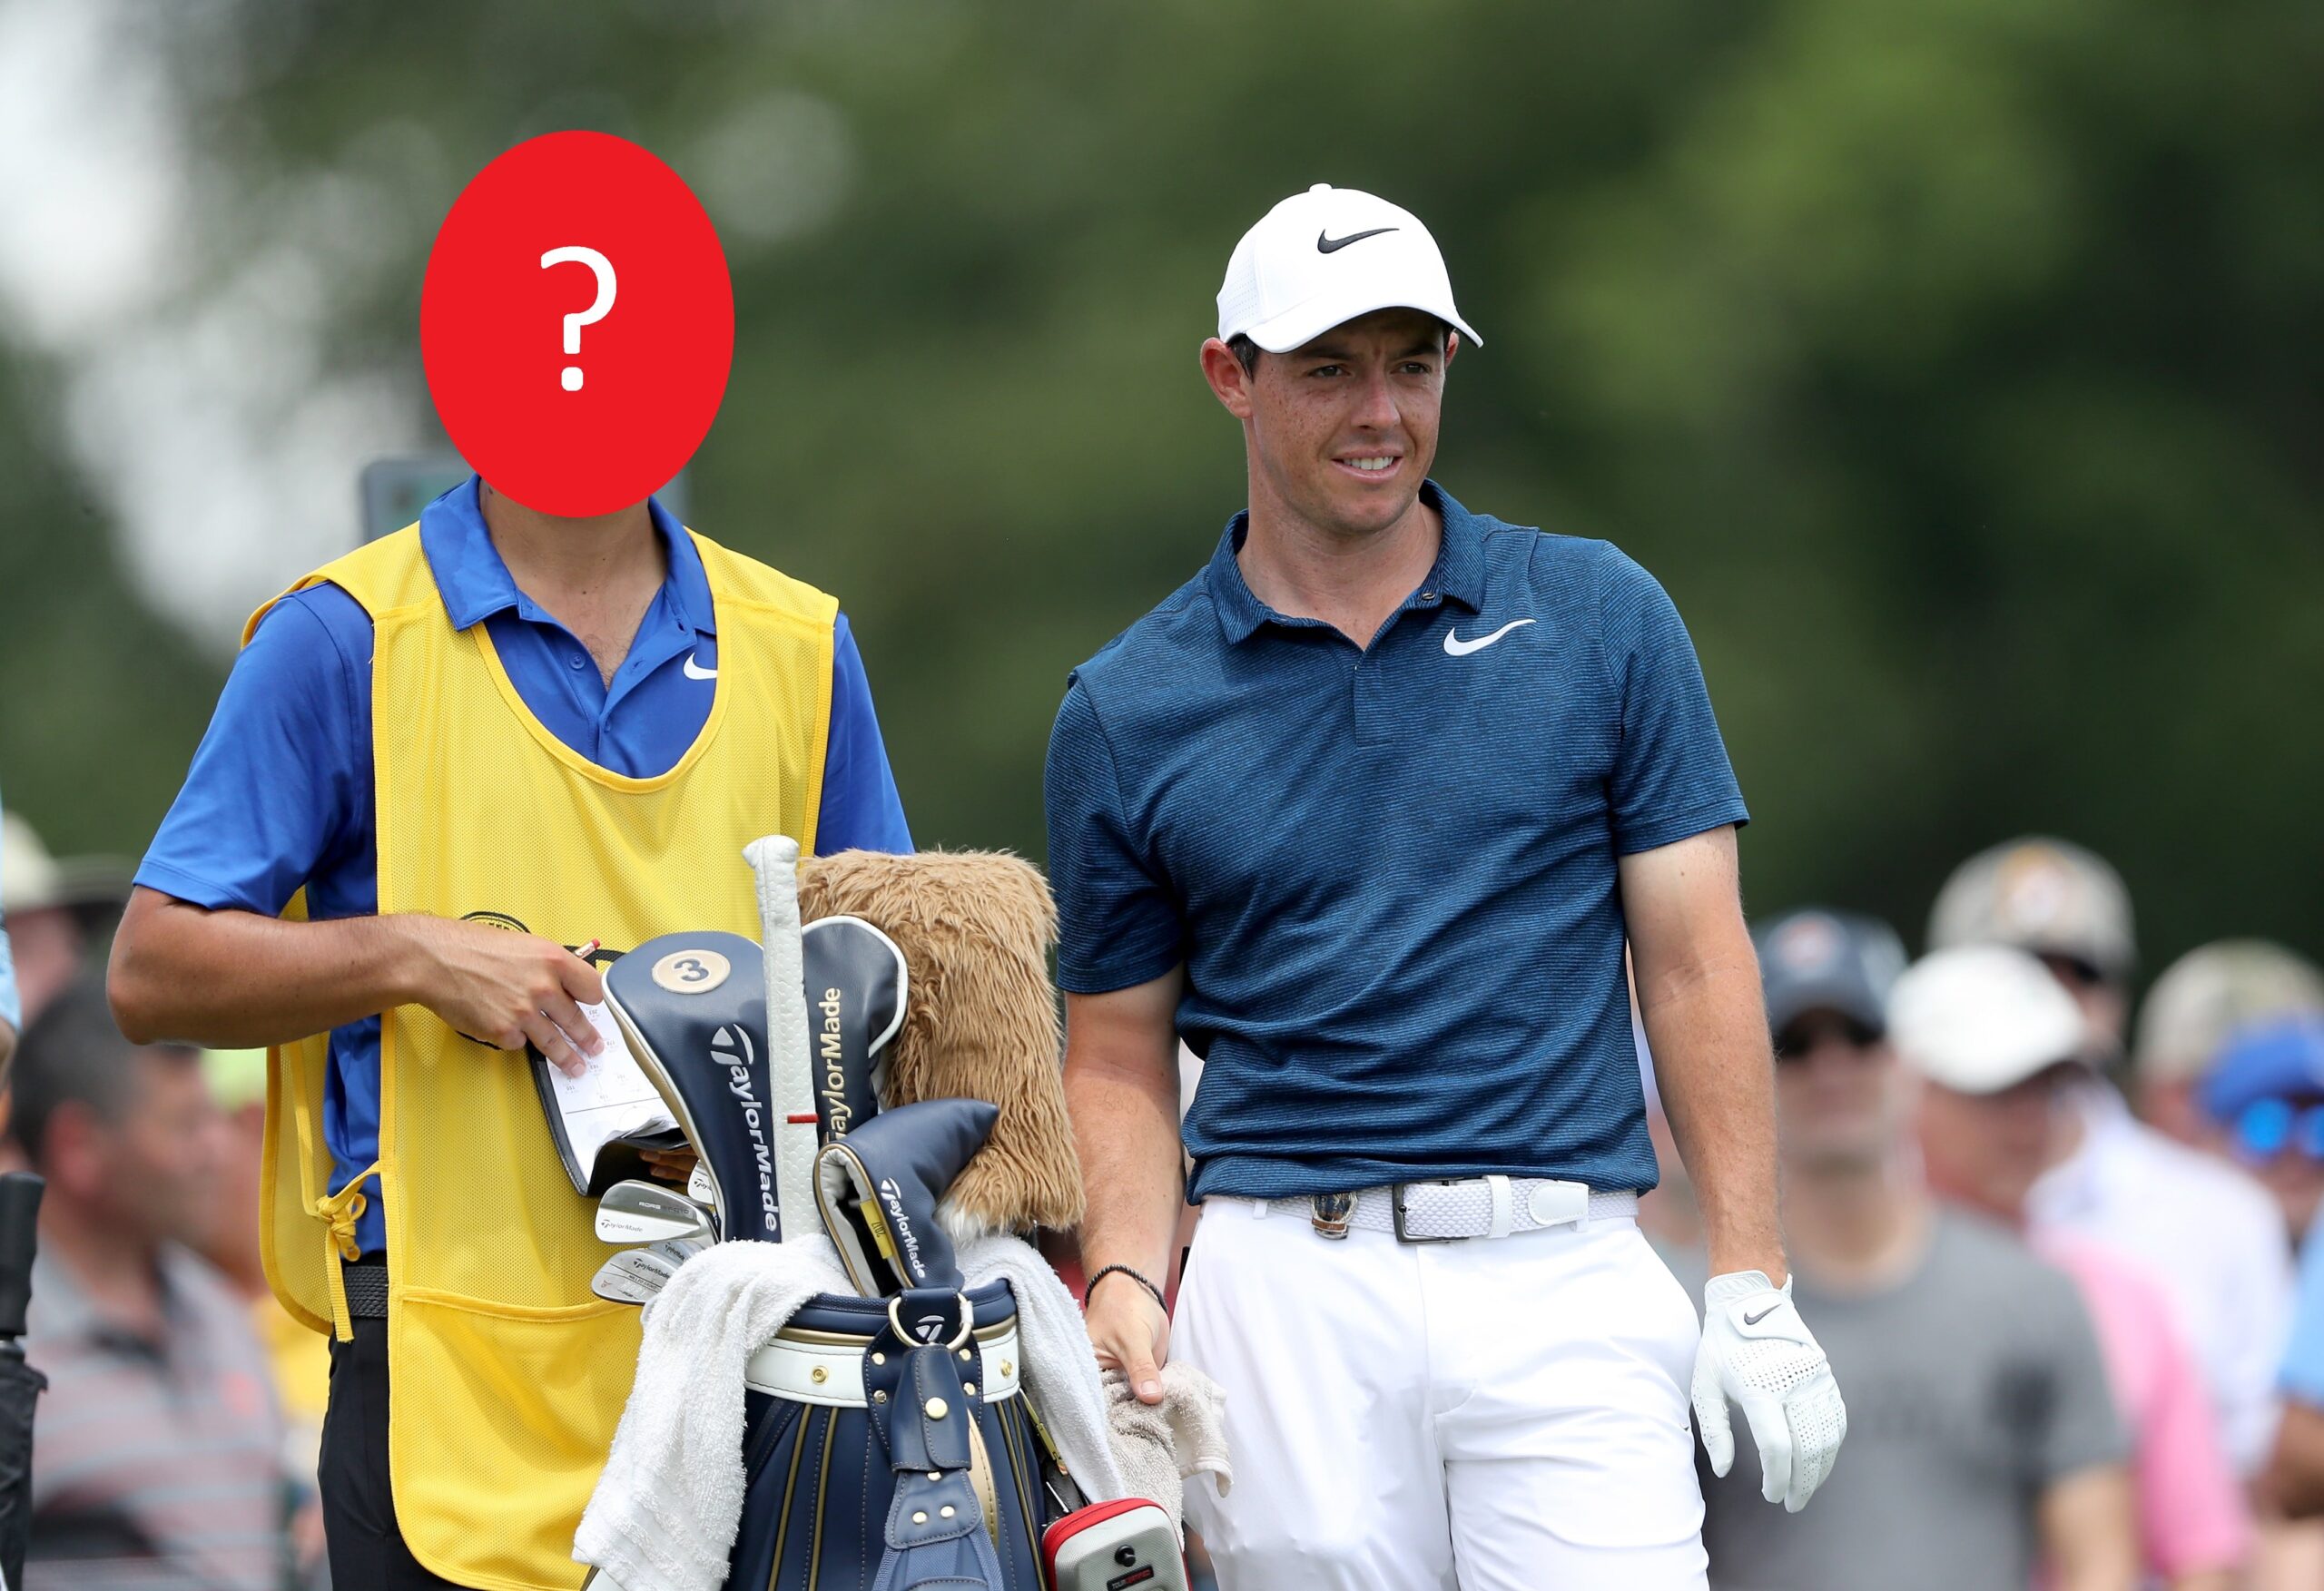 Don't bother applying to be McIlroy's caddie - this guy's nailed it